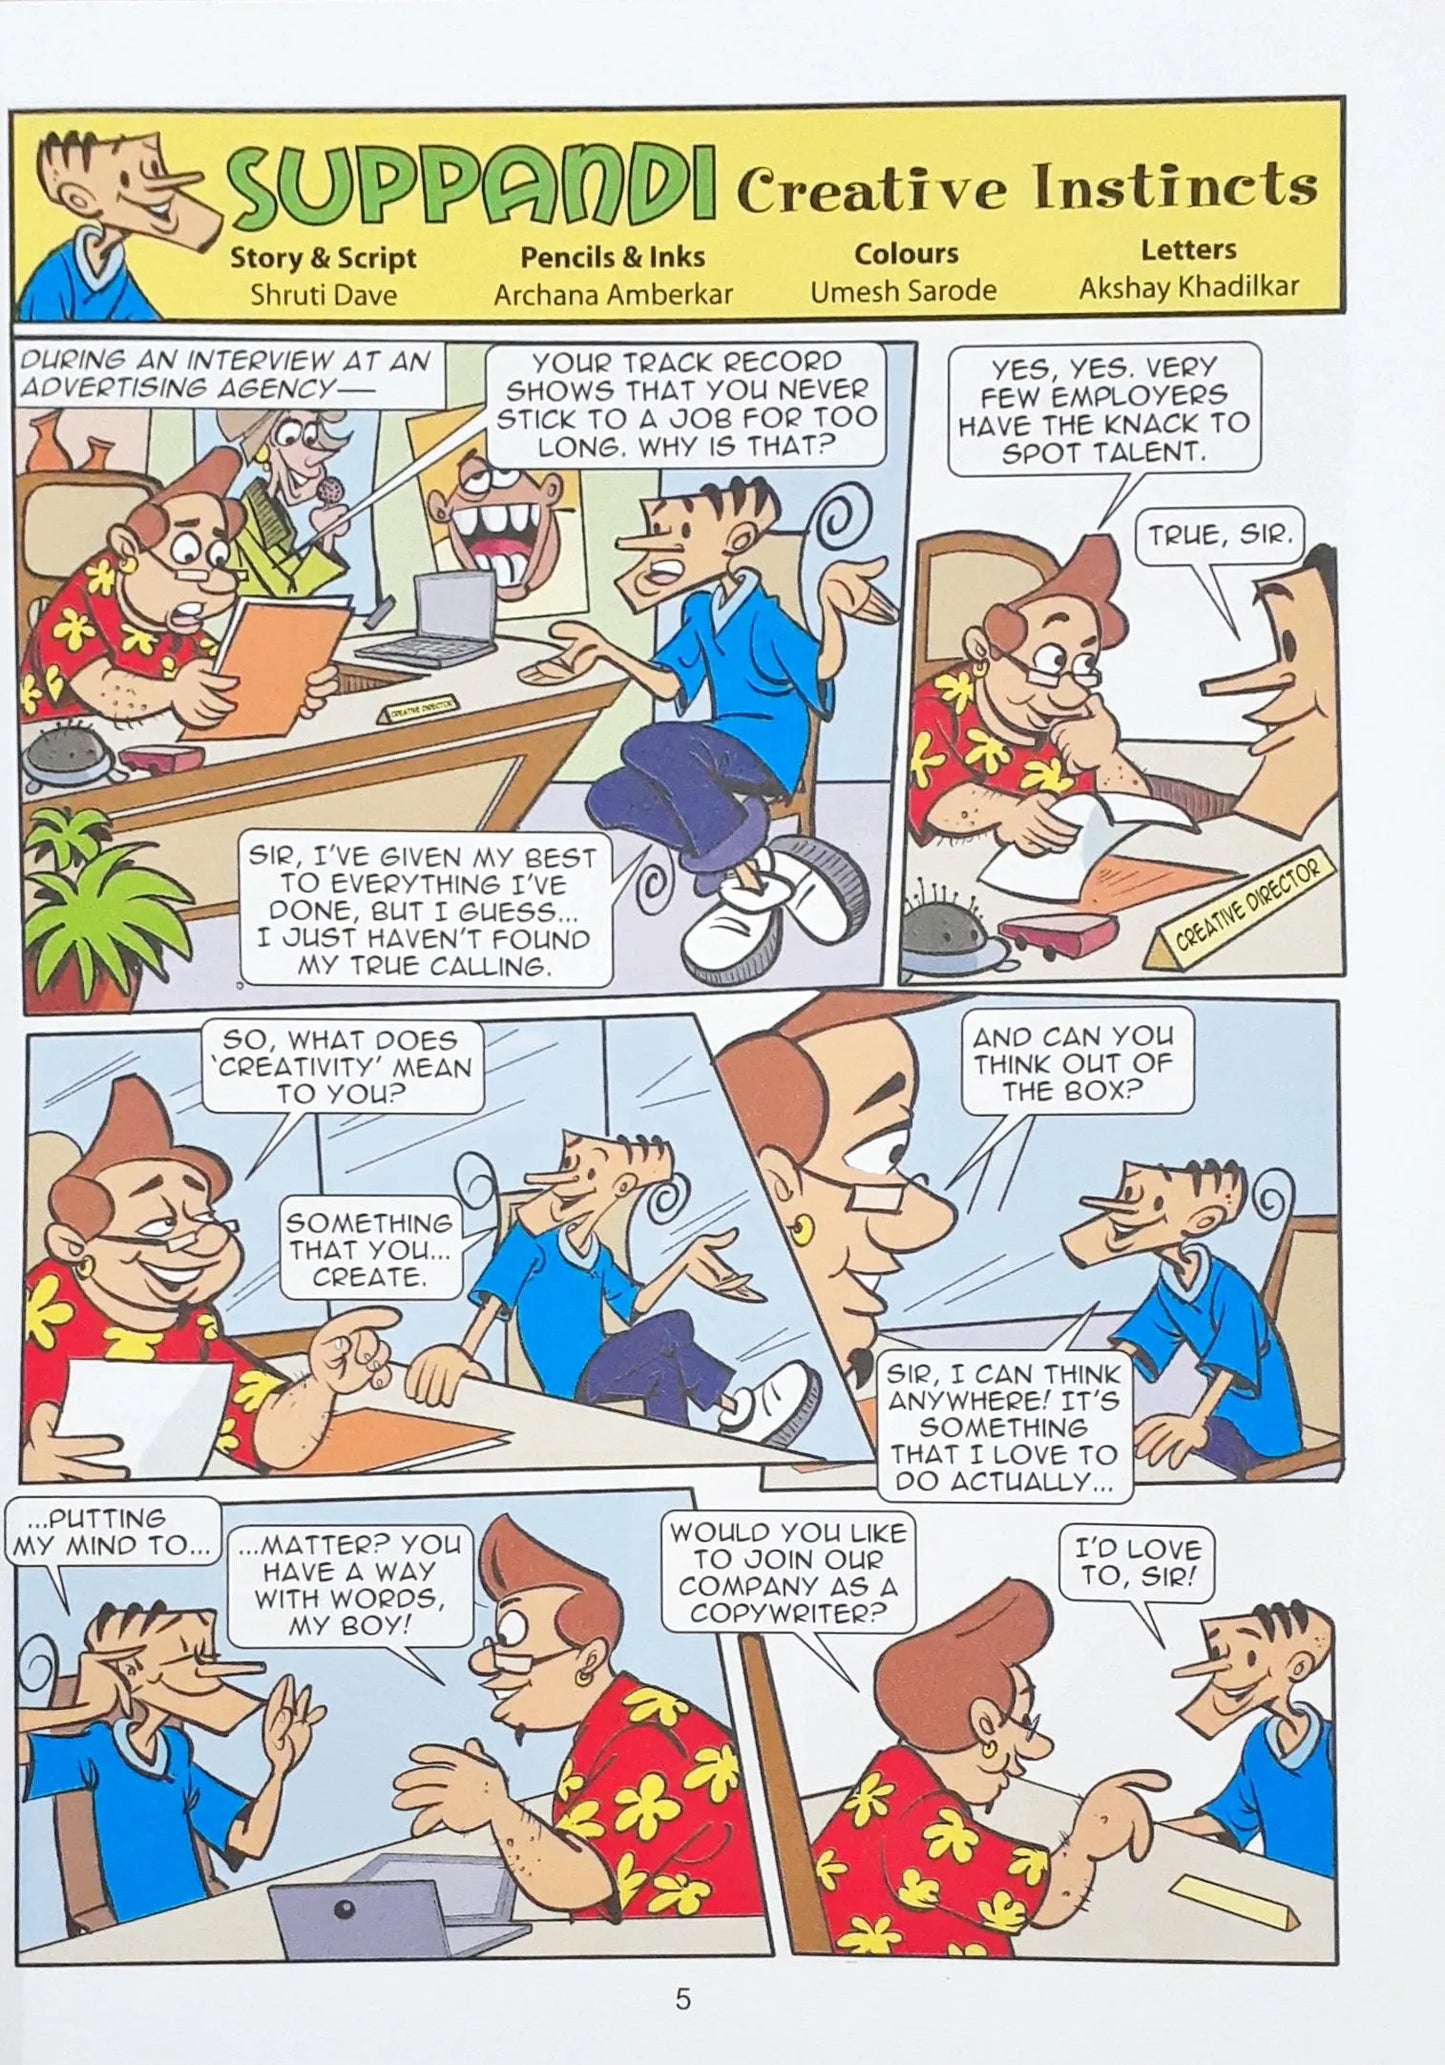 Tinkle - Suppandi Volume 3 The Laughter Never Ends